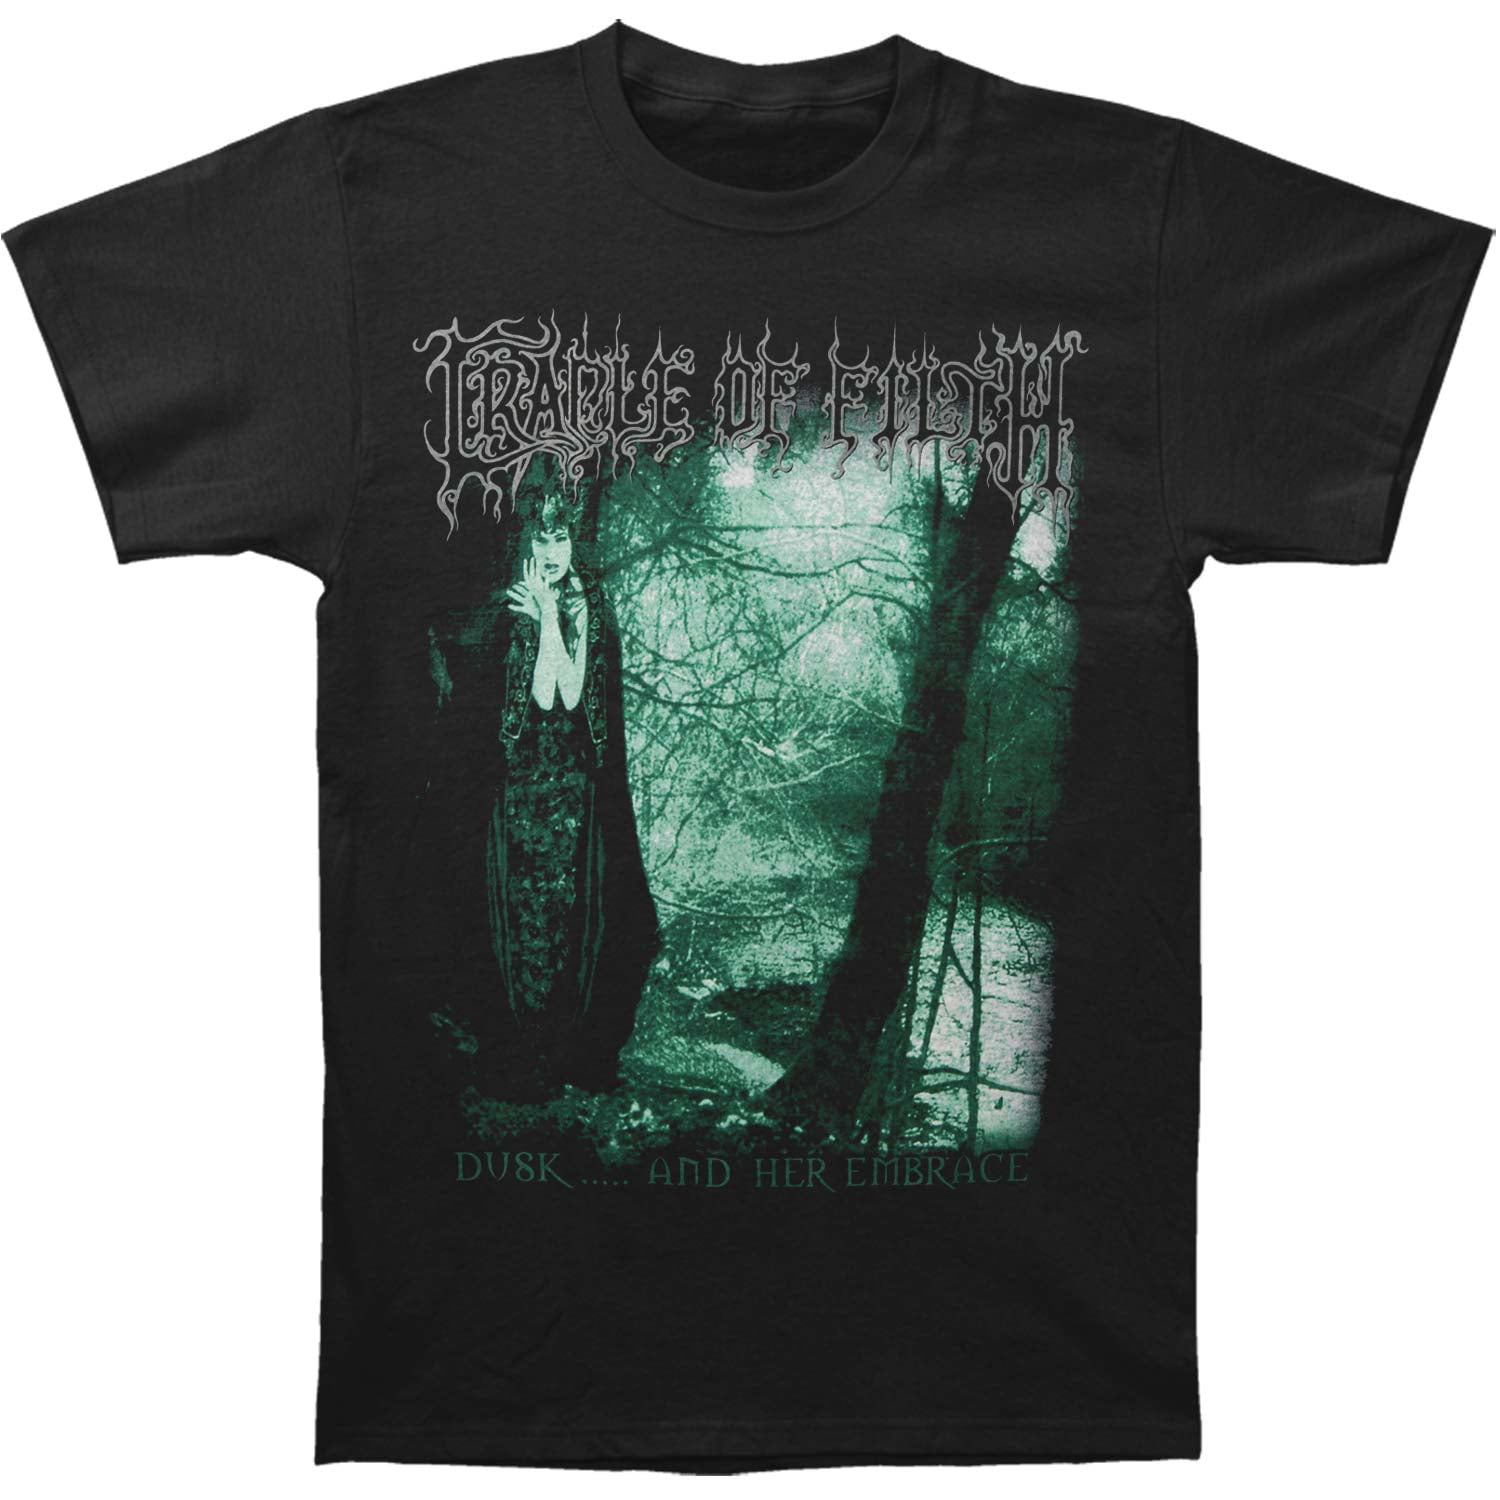 Authentic CRADLE OF FILTH Dusk And Her Embrace T-Shirt S M L XL 2XL NEW